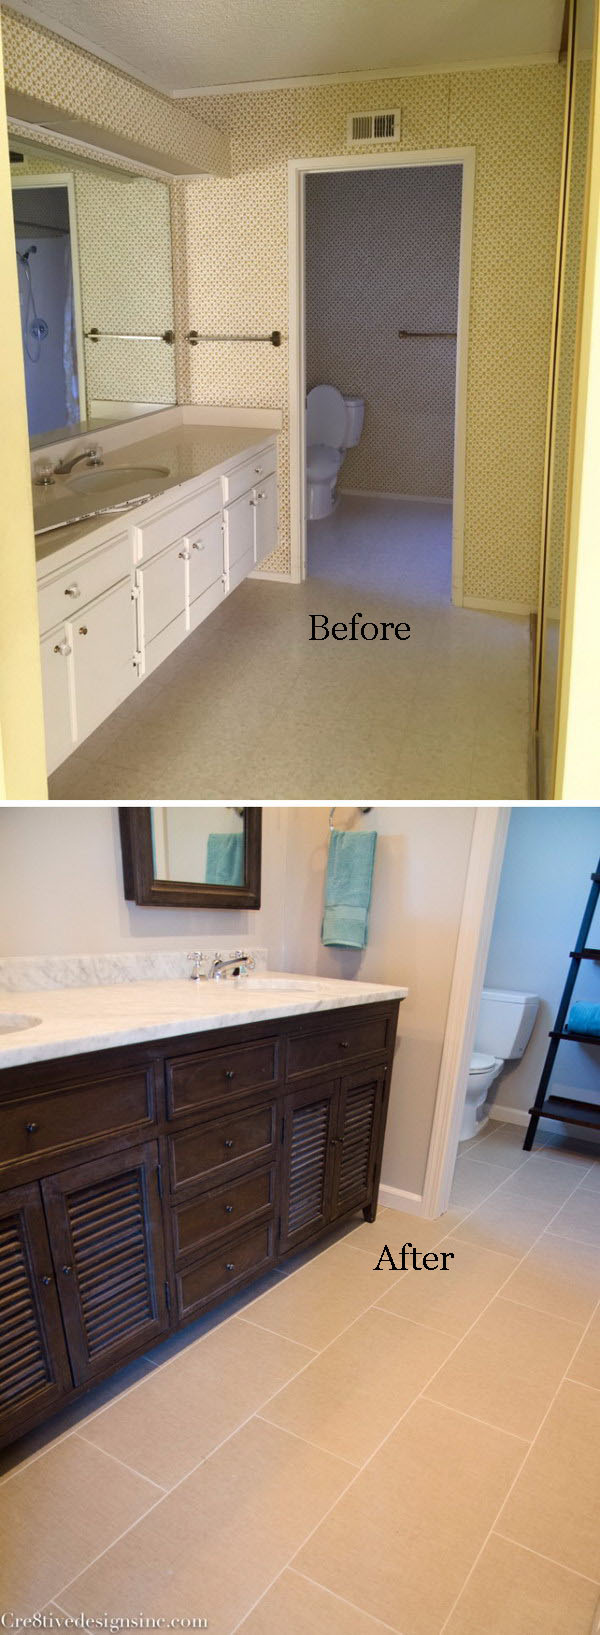 49-50-bathroom-remodel-before-and-after